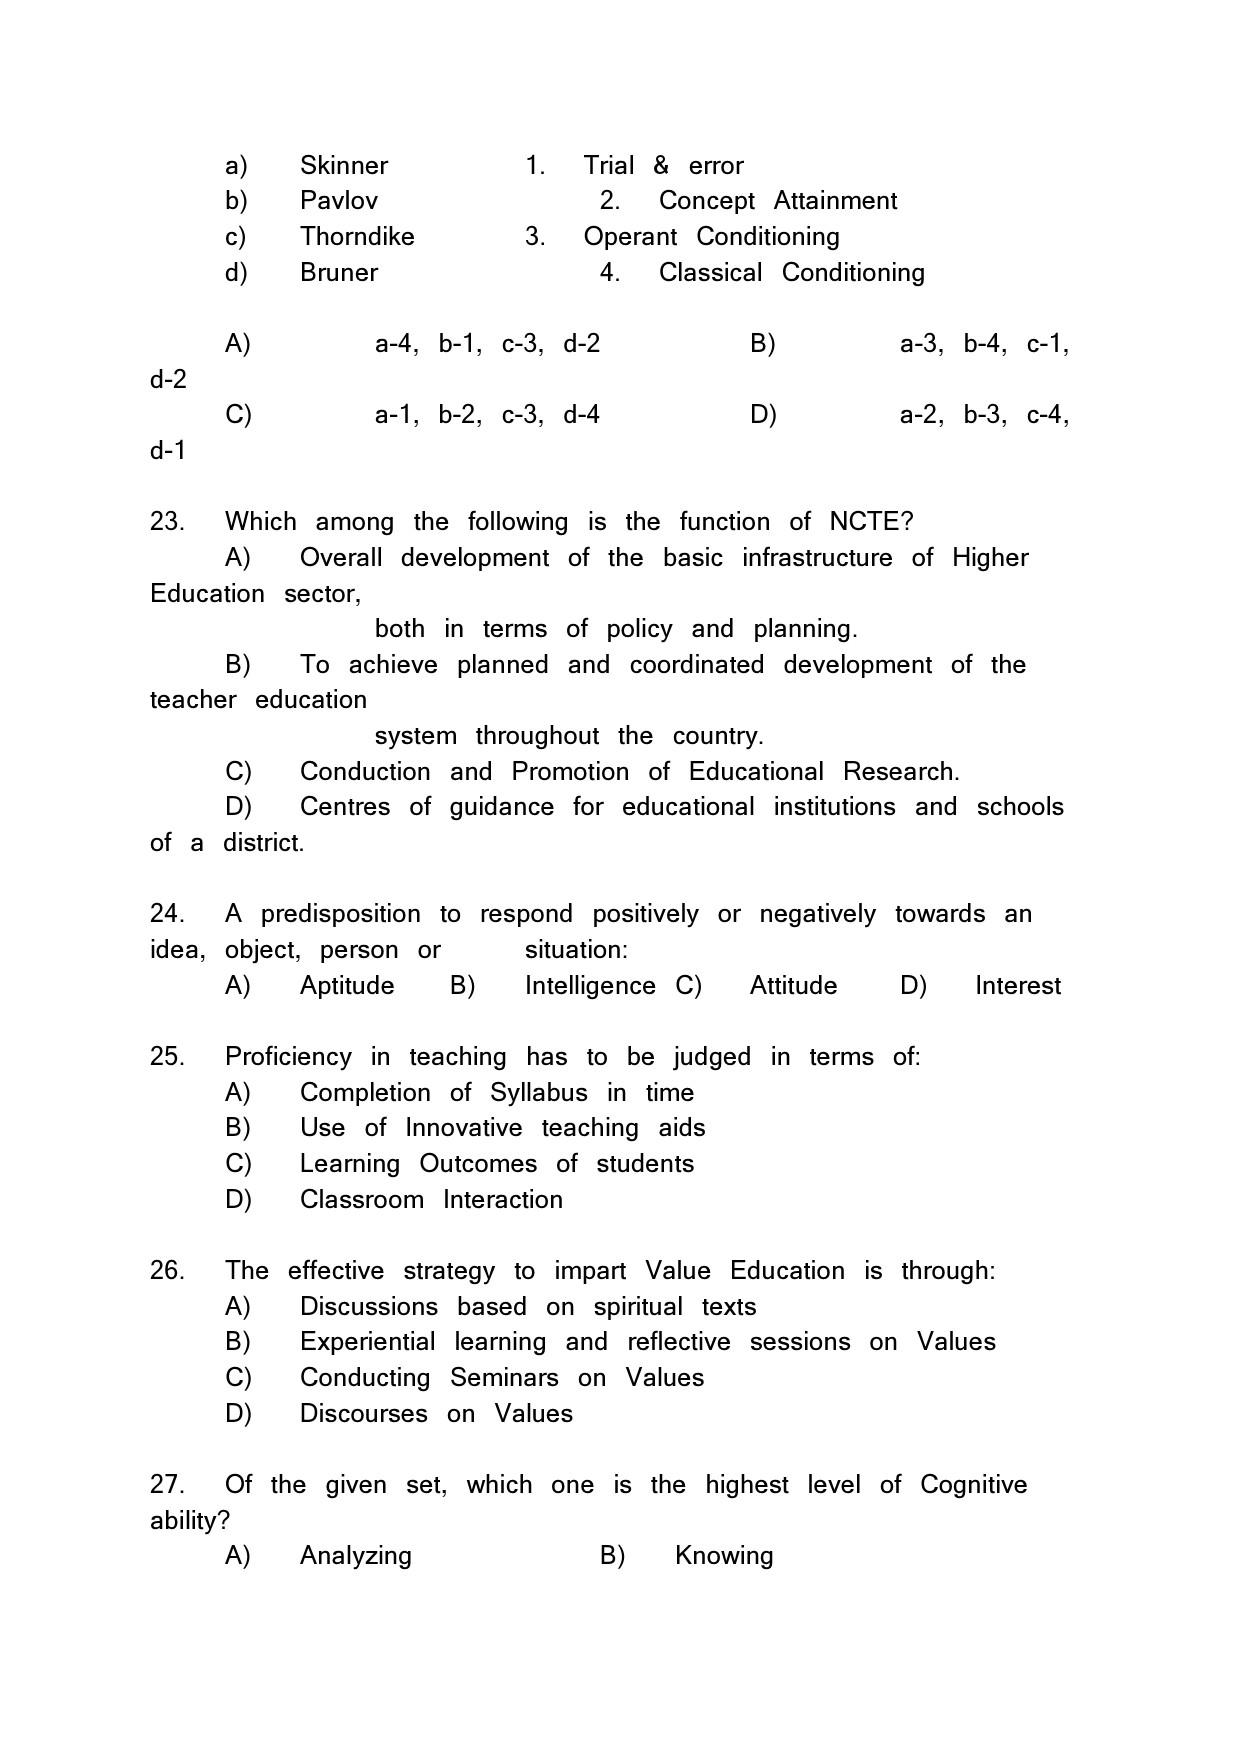 Kerala SET General Knowledge Exam Question Paper February 2020 4